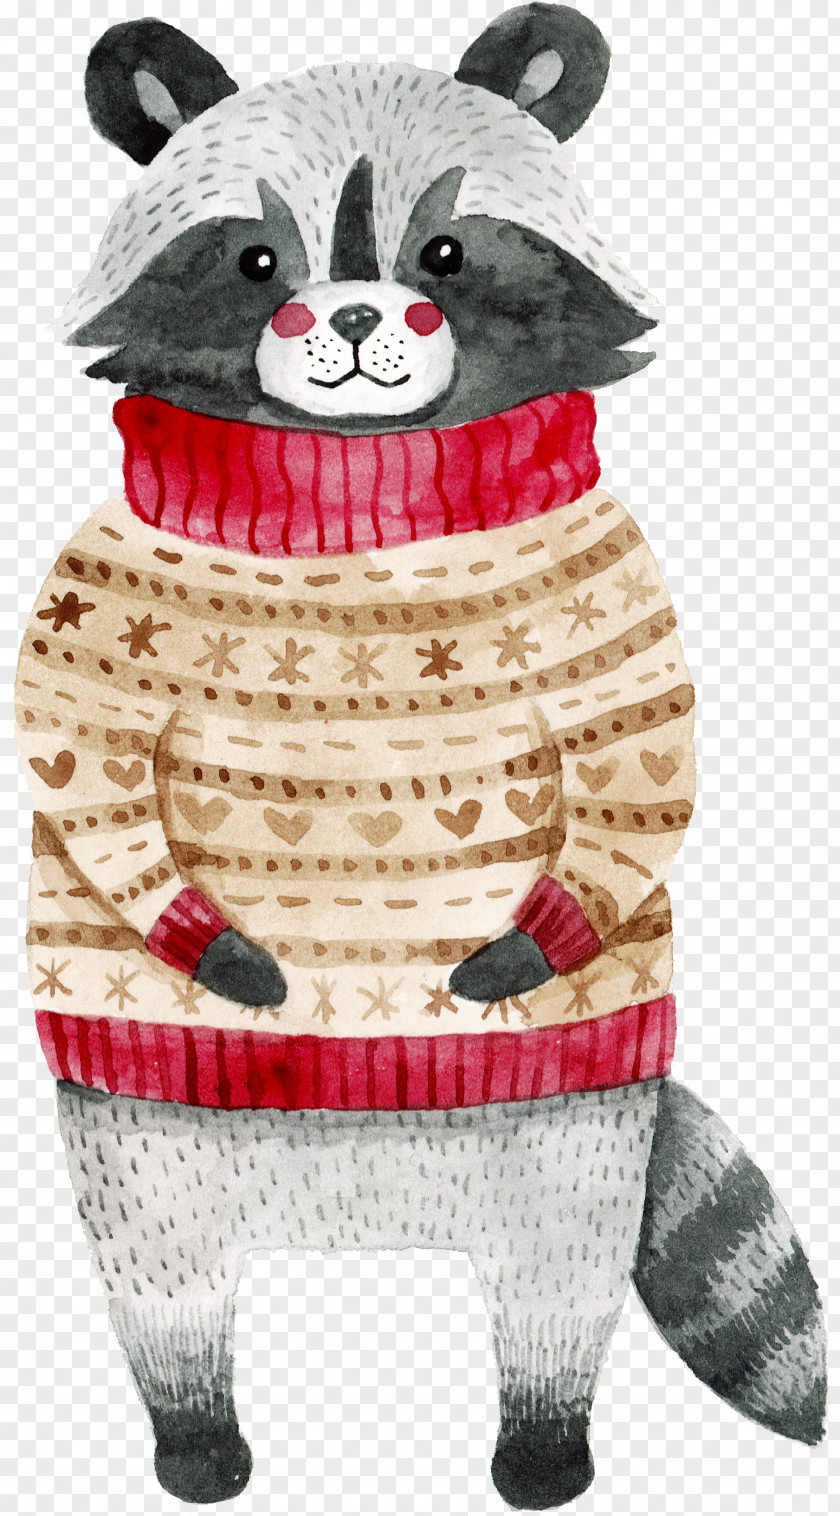 Sweater Raccoon Material Free To Pull Watercolor Painting Drawing Christmas Illustration PNG